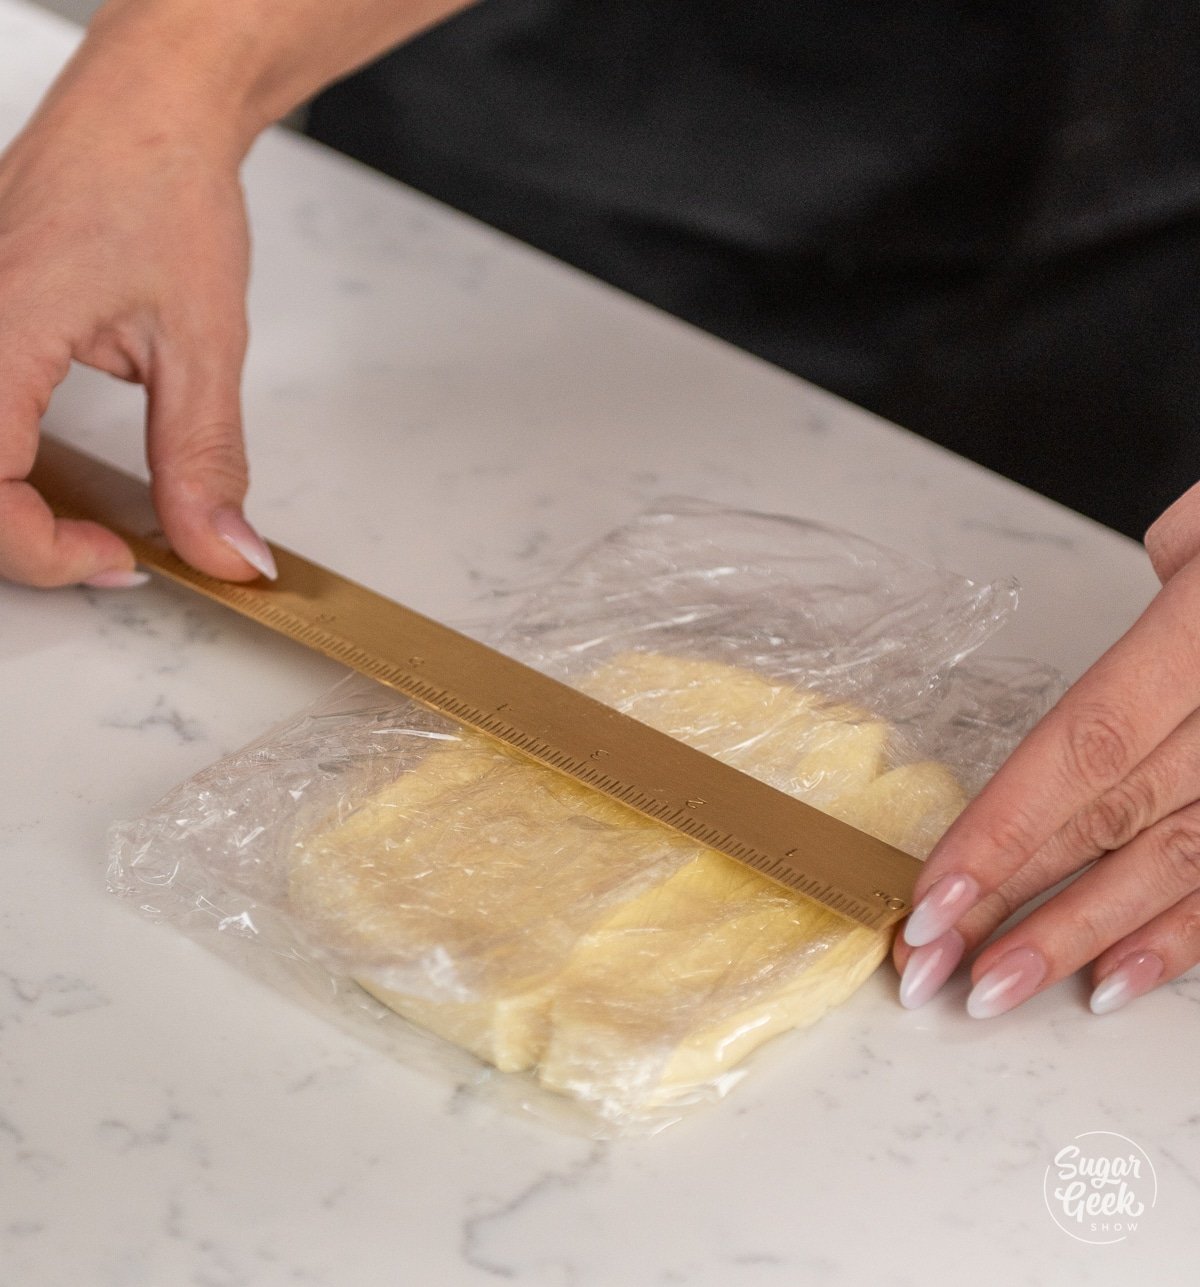 hands holding a ruler over a square piece of plastic wrap and butter